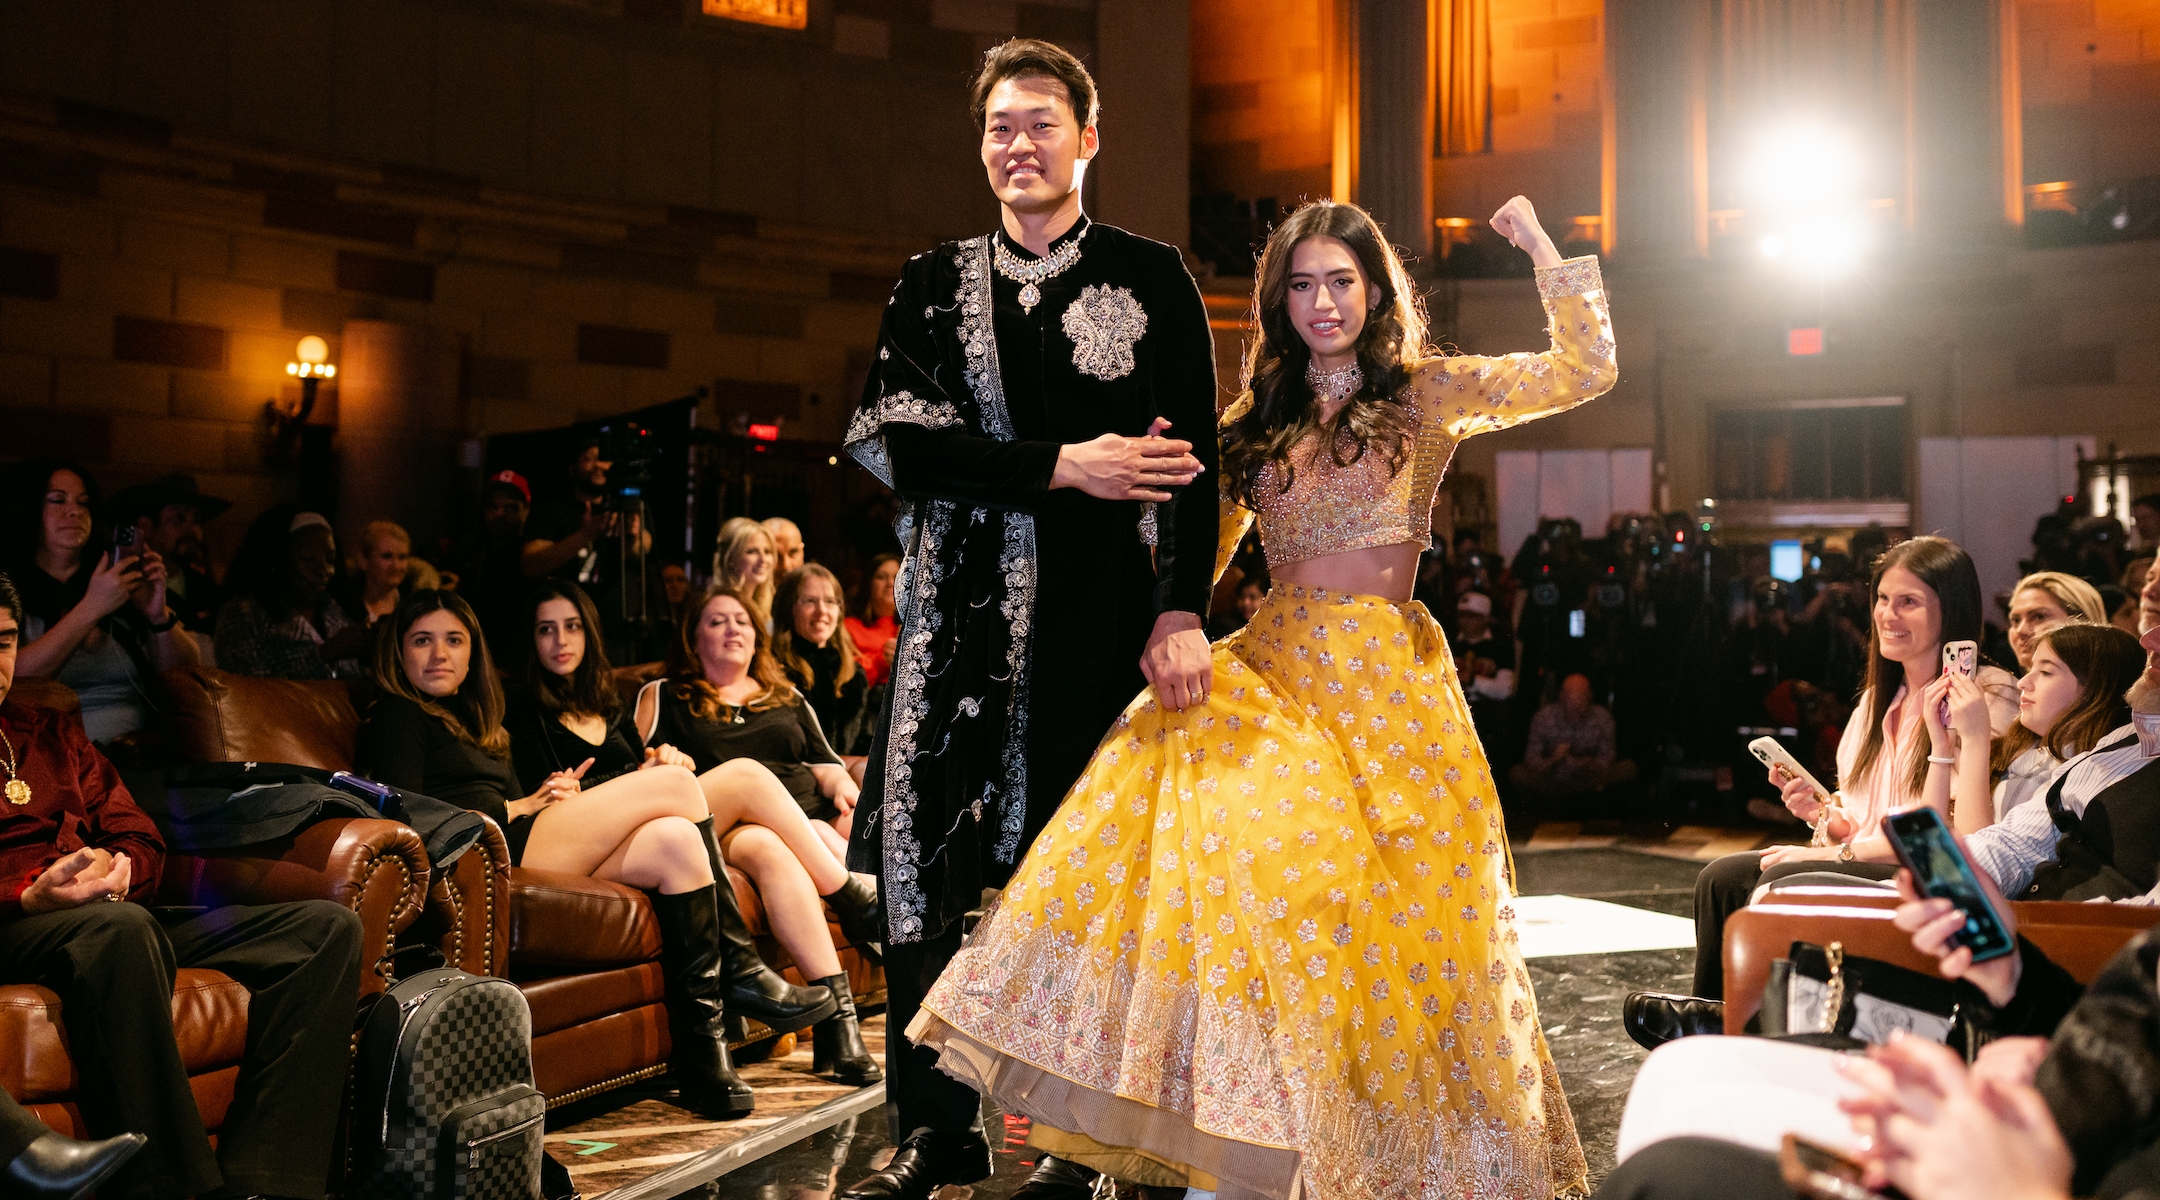 Brasch, who has muscular dystrophy, walked the runway at New York Fashion Week for the South Asian brand Randhawa. (Hilary Phelps)